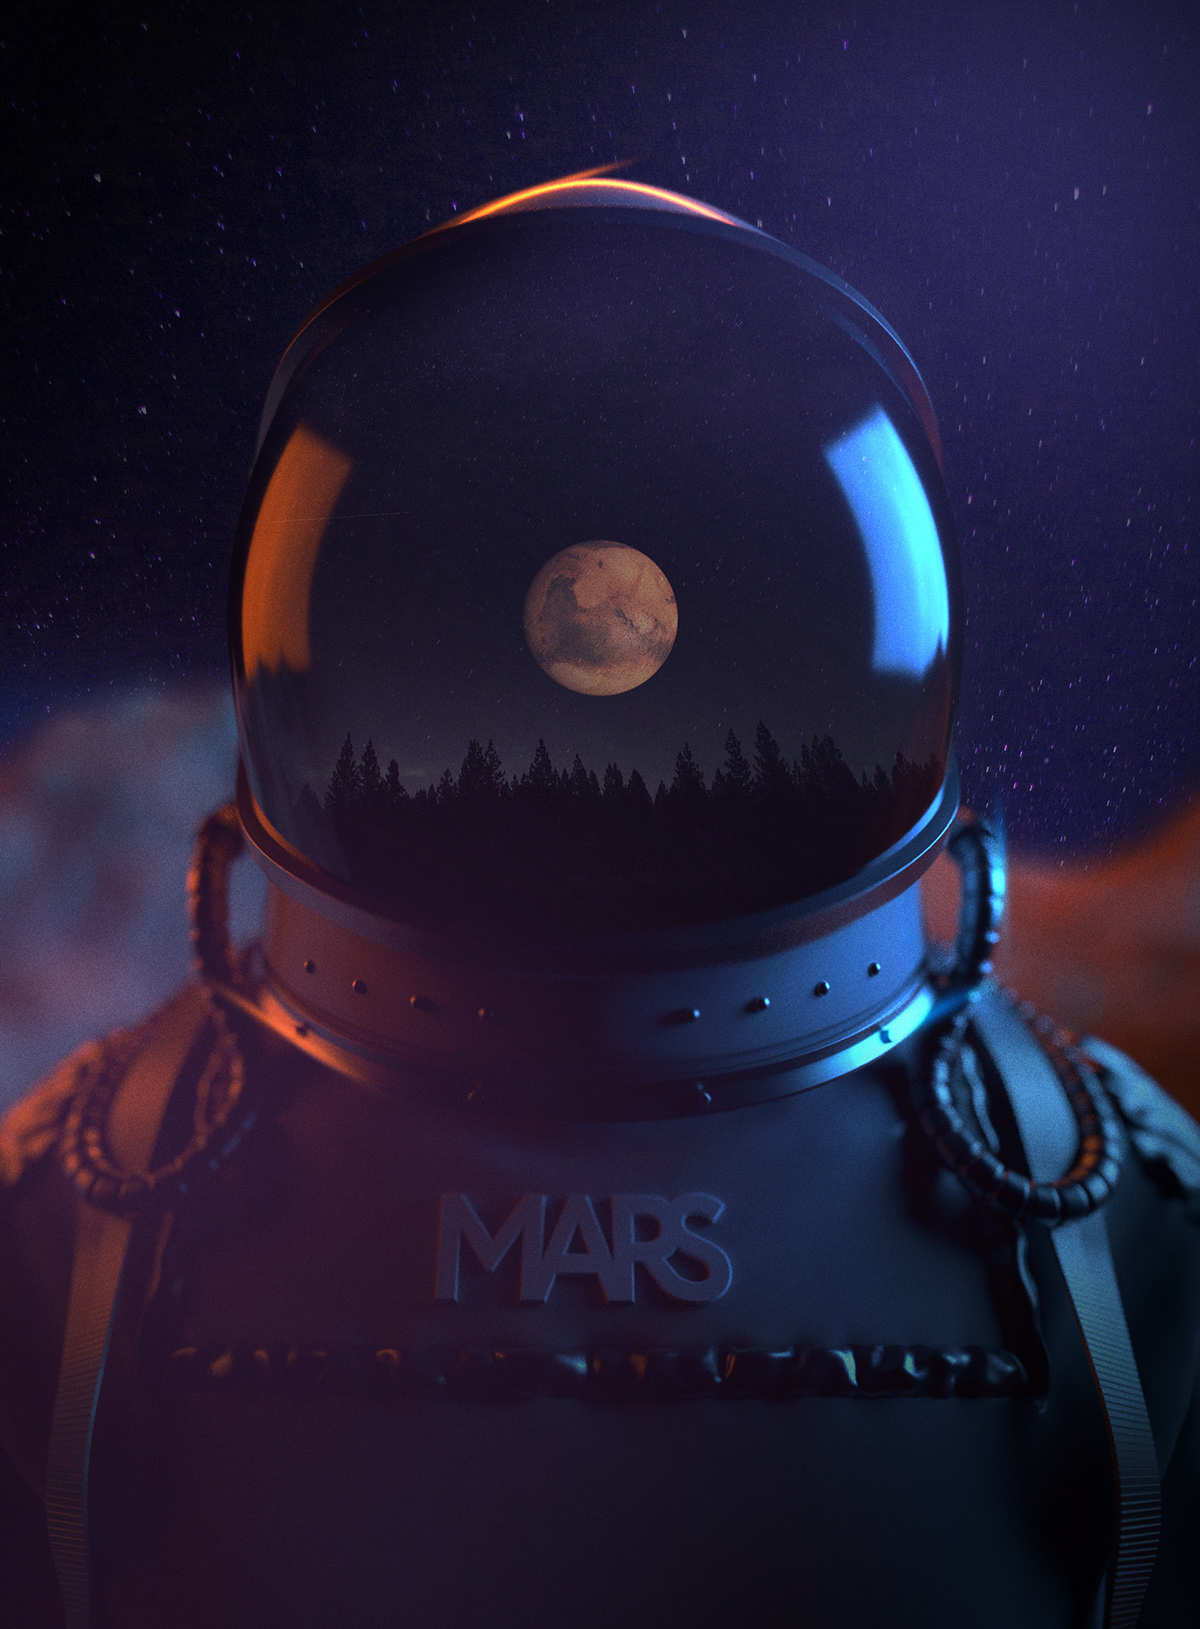 SPACE collection on Behance